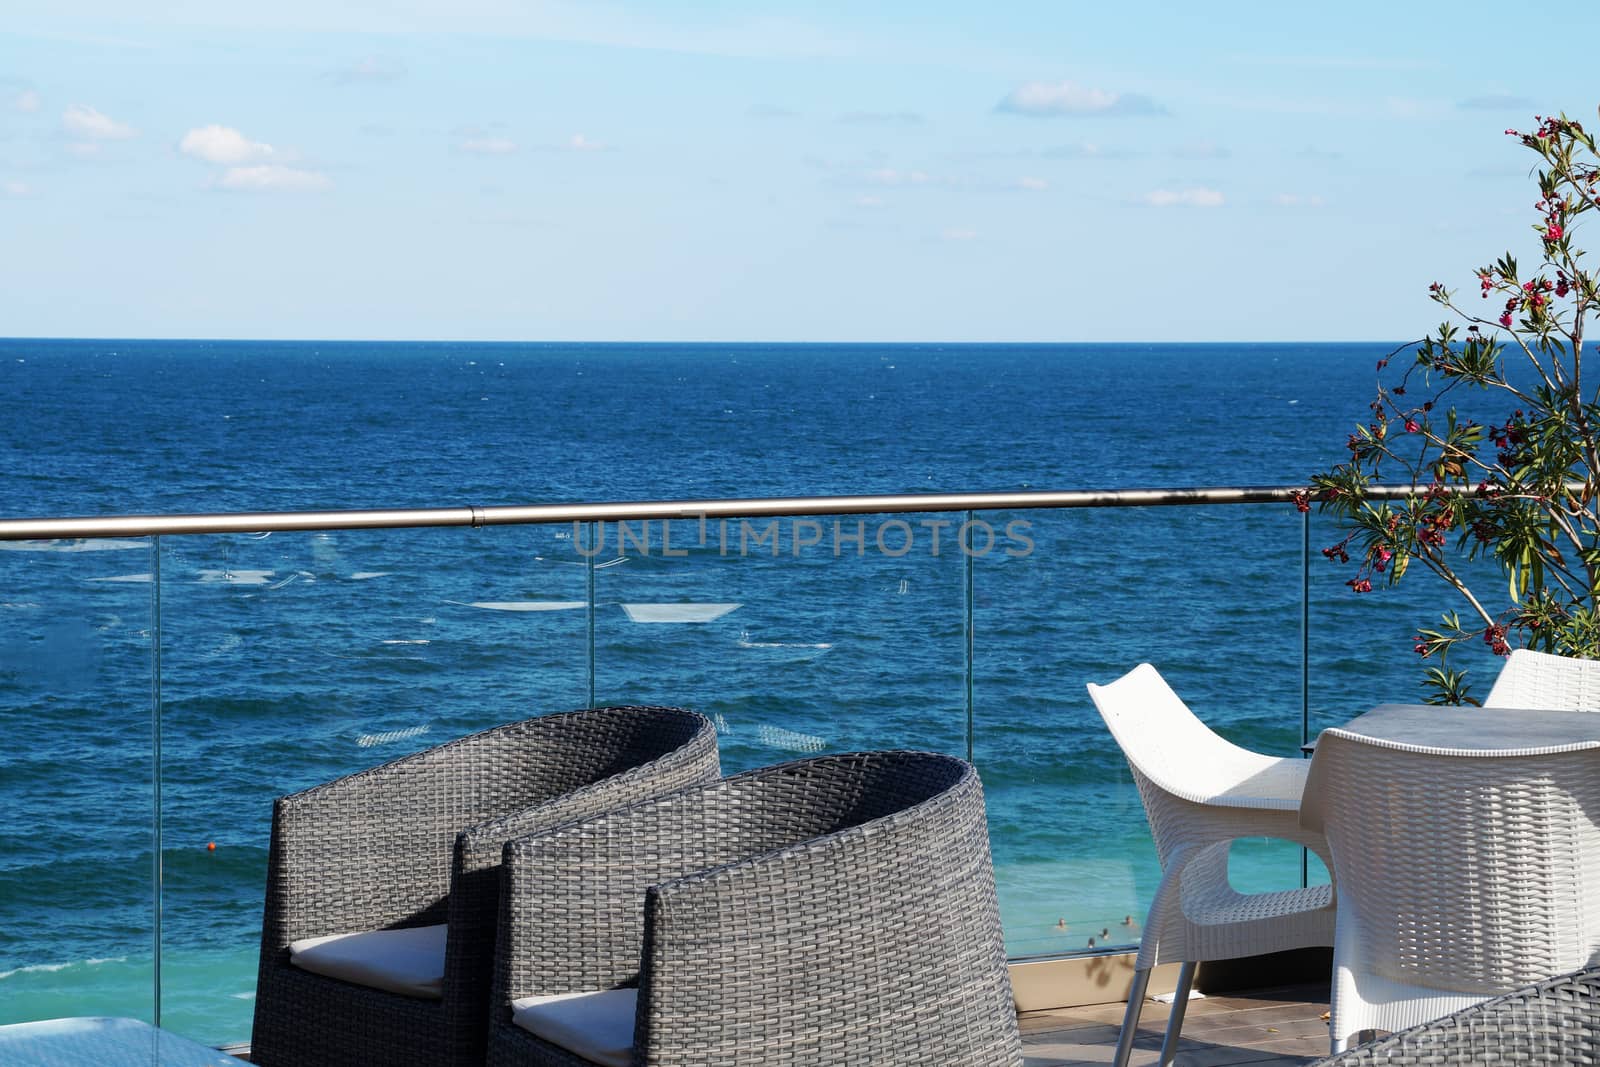 armchairs and a table for relaxing on the patio overlooking the sea by Annado